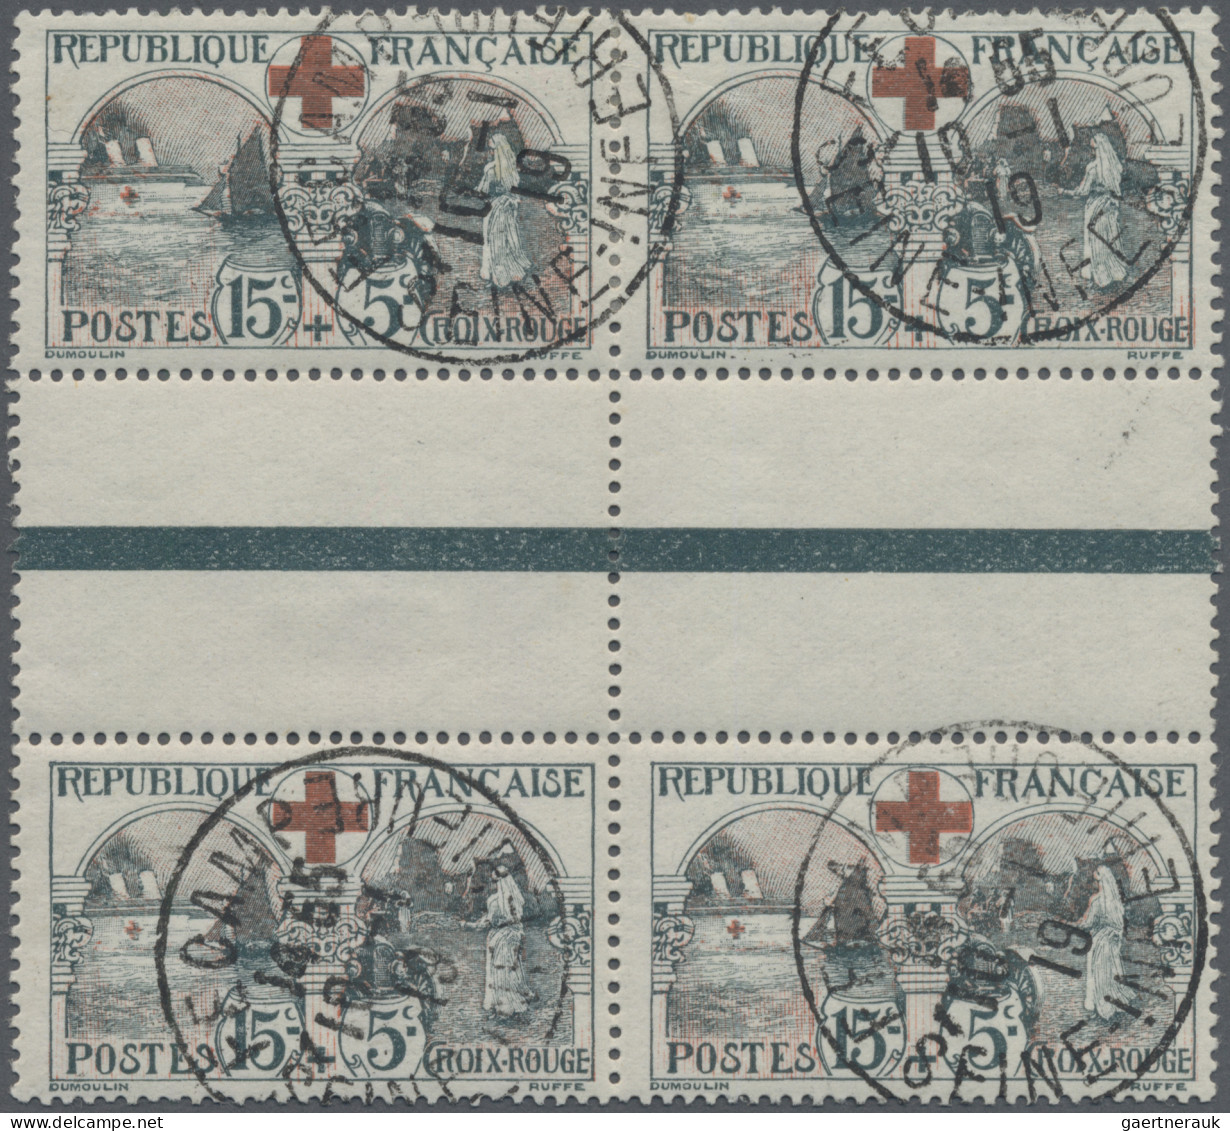 Thematics: Red Cross: 1918, France, Semipostal For The Red Cross, 15 C + 5 C Gre - Rotes Kreuz